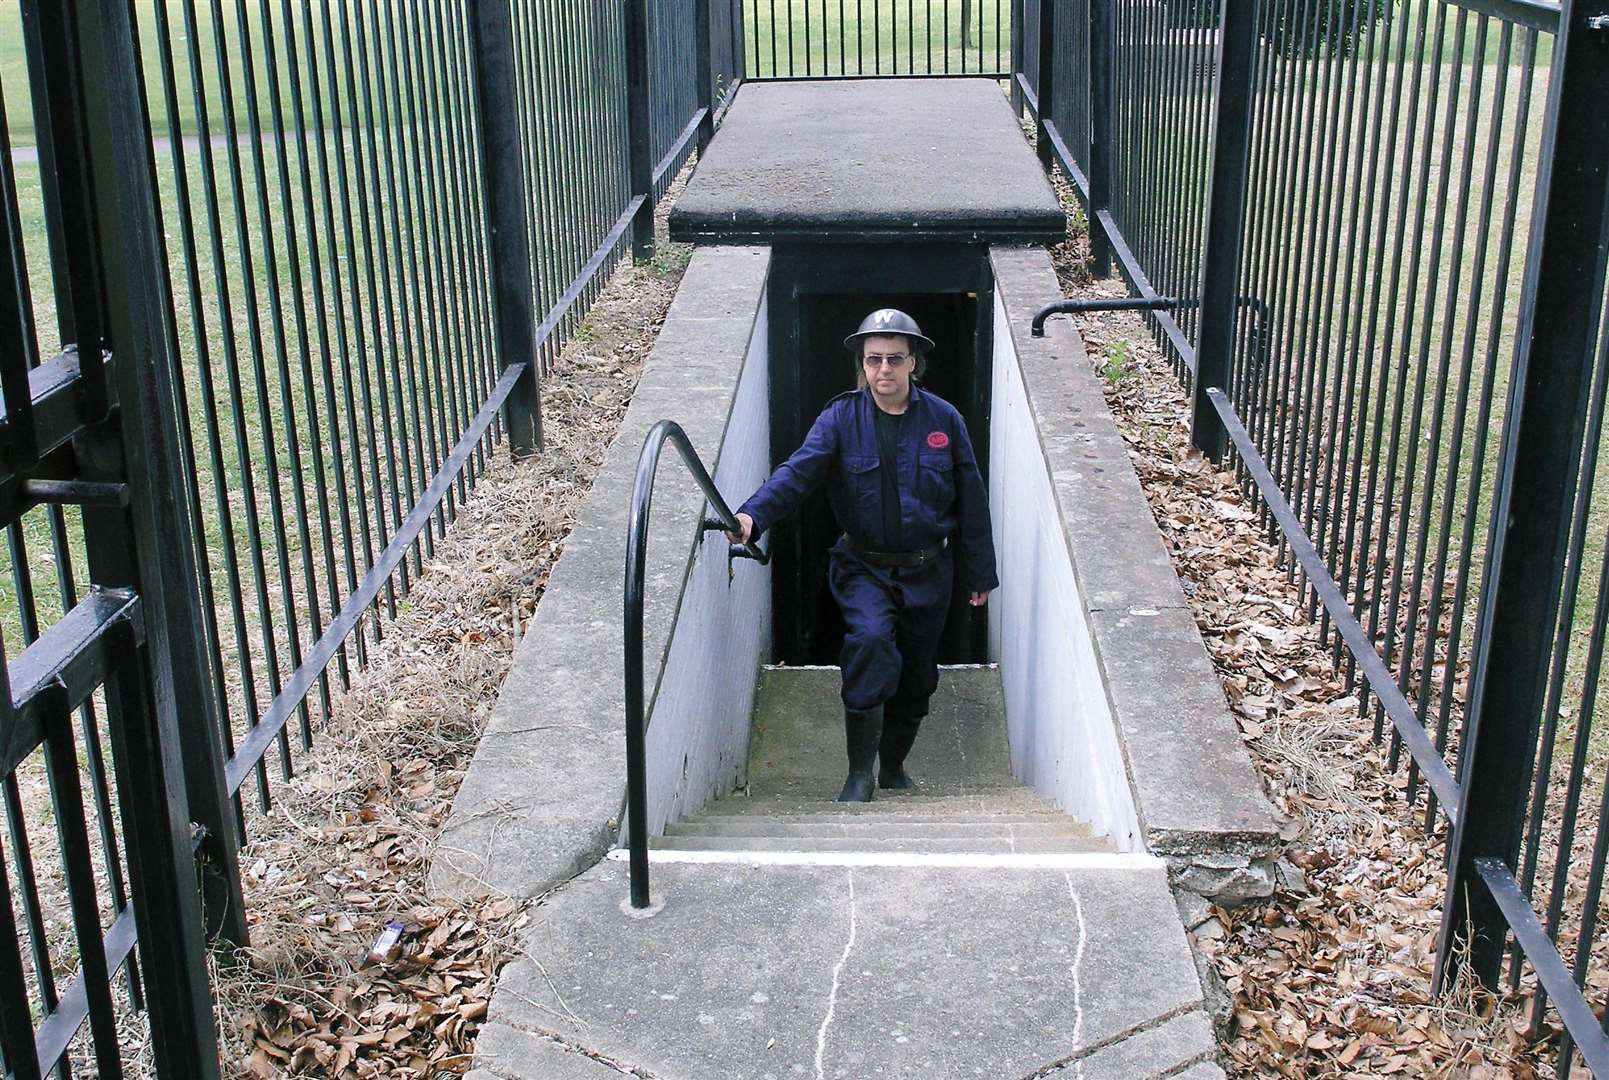 Entrance to the bunker below Woodlands Park. Photo: Victor Smith